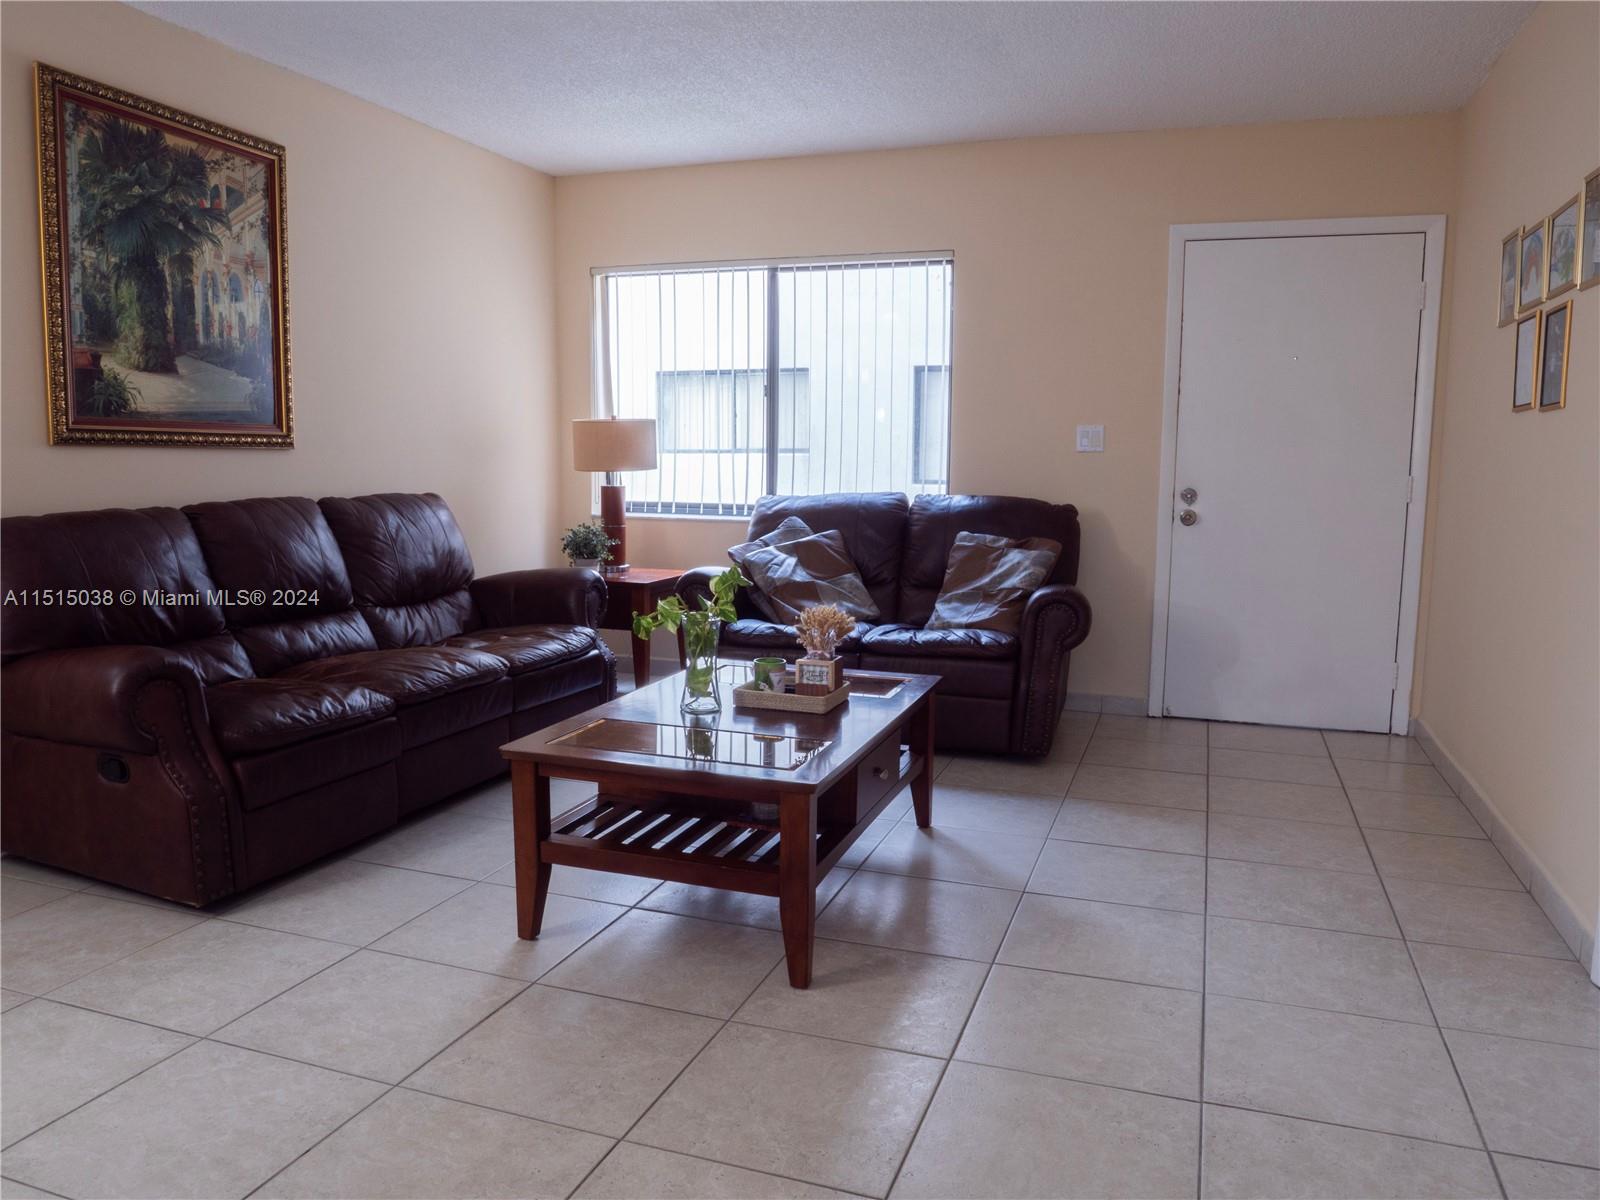 Property for Sale at 8760 Sw 133rd Ave Rd Rd 212, Miami, Broward County, Florida - Bedrooms: 3 
Bathrooms: 2  - $315,000